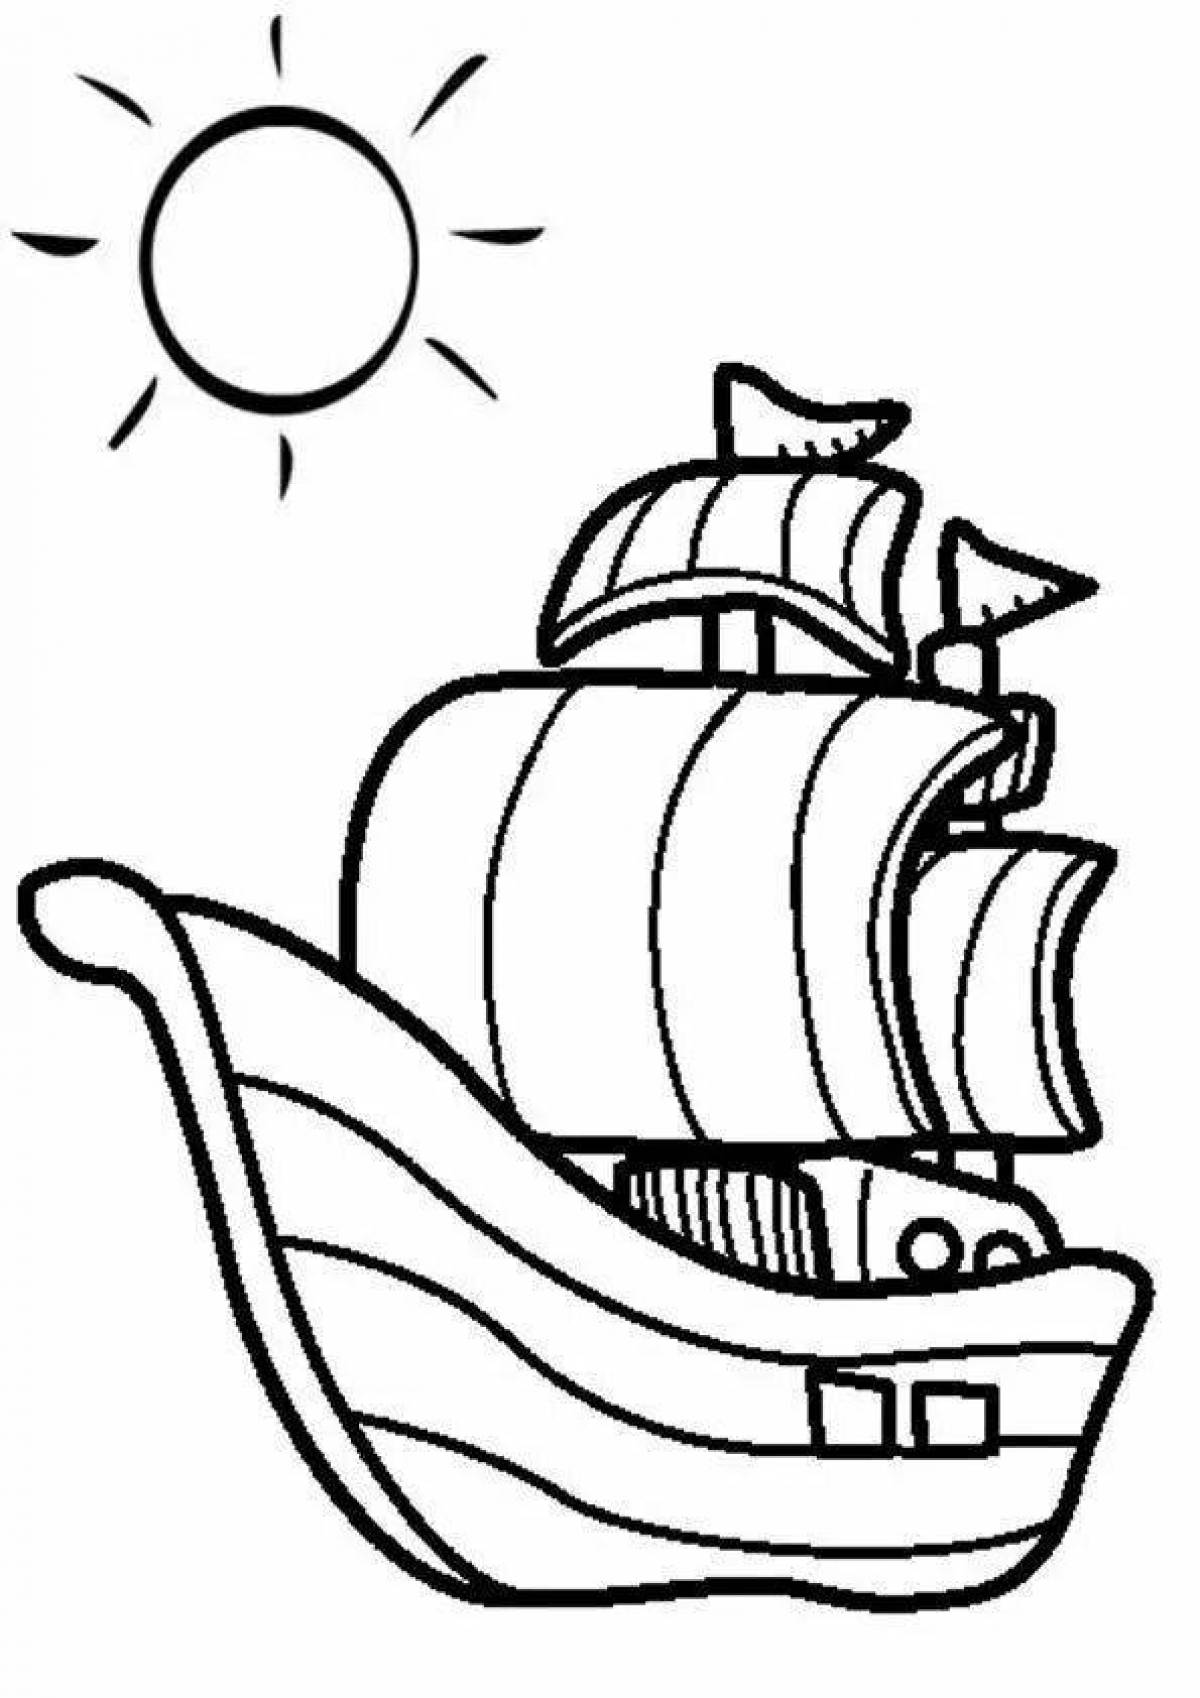 Fun coloring ship for 5-6 year olds